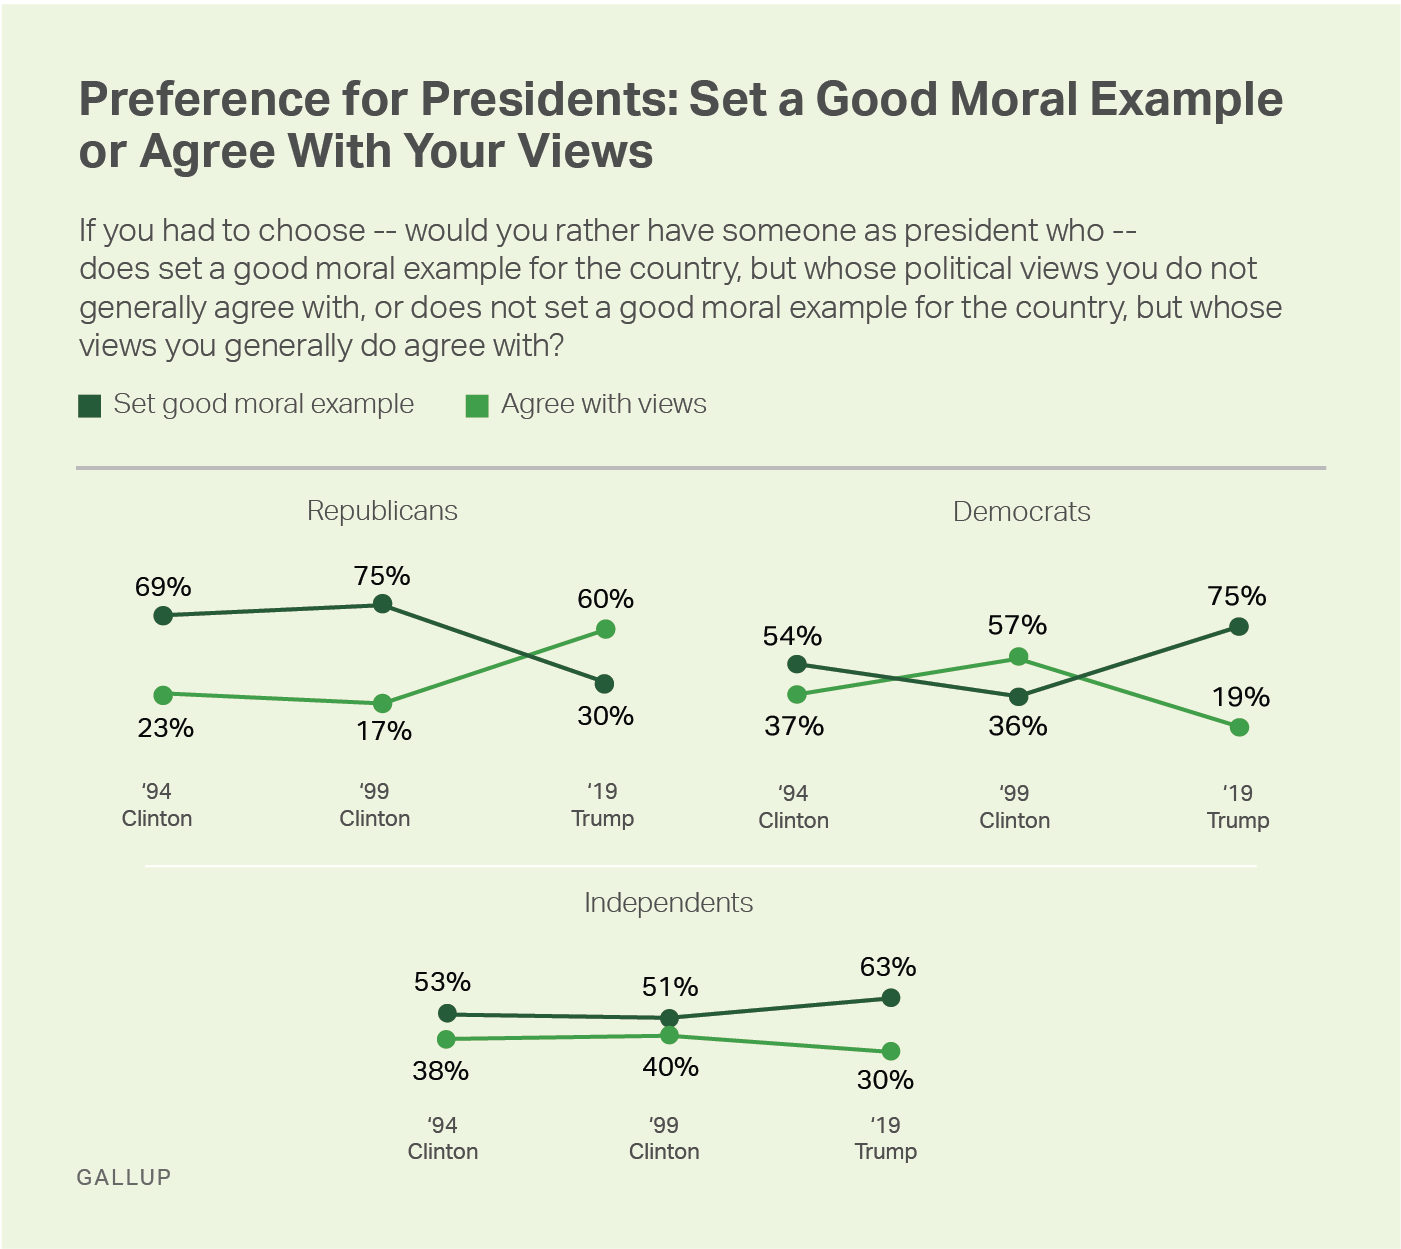 Line graphs. The priority Democrats and Republicans place on presidents setting a good moral example have changed since 1999.